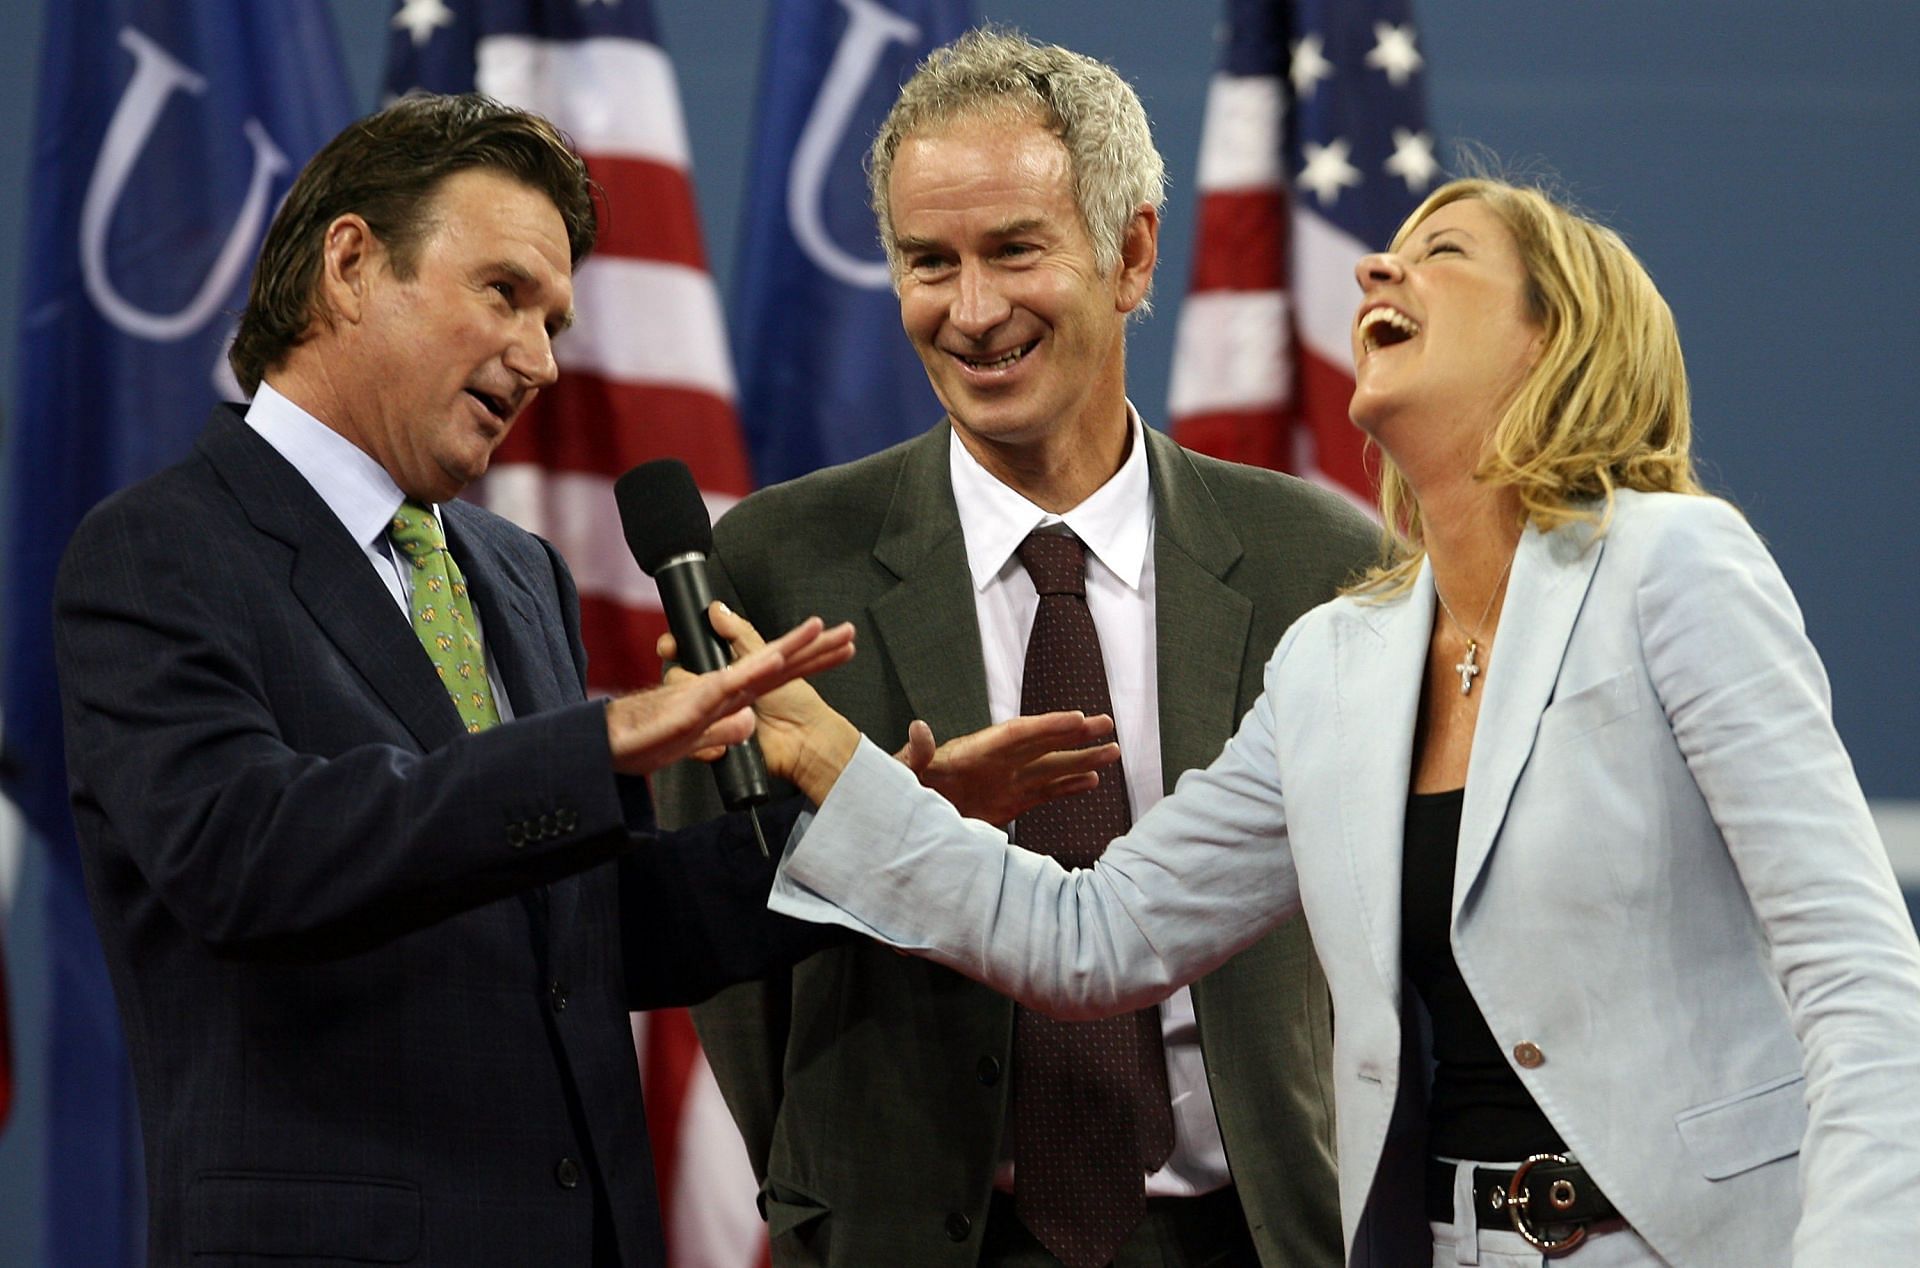 Chris Evert and Jimmy Connors with John McEnroe at the 2006 US Open